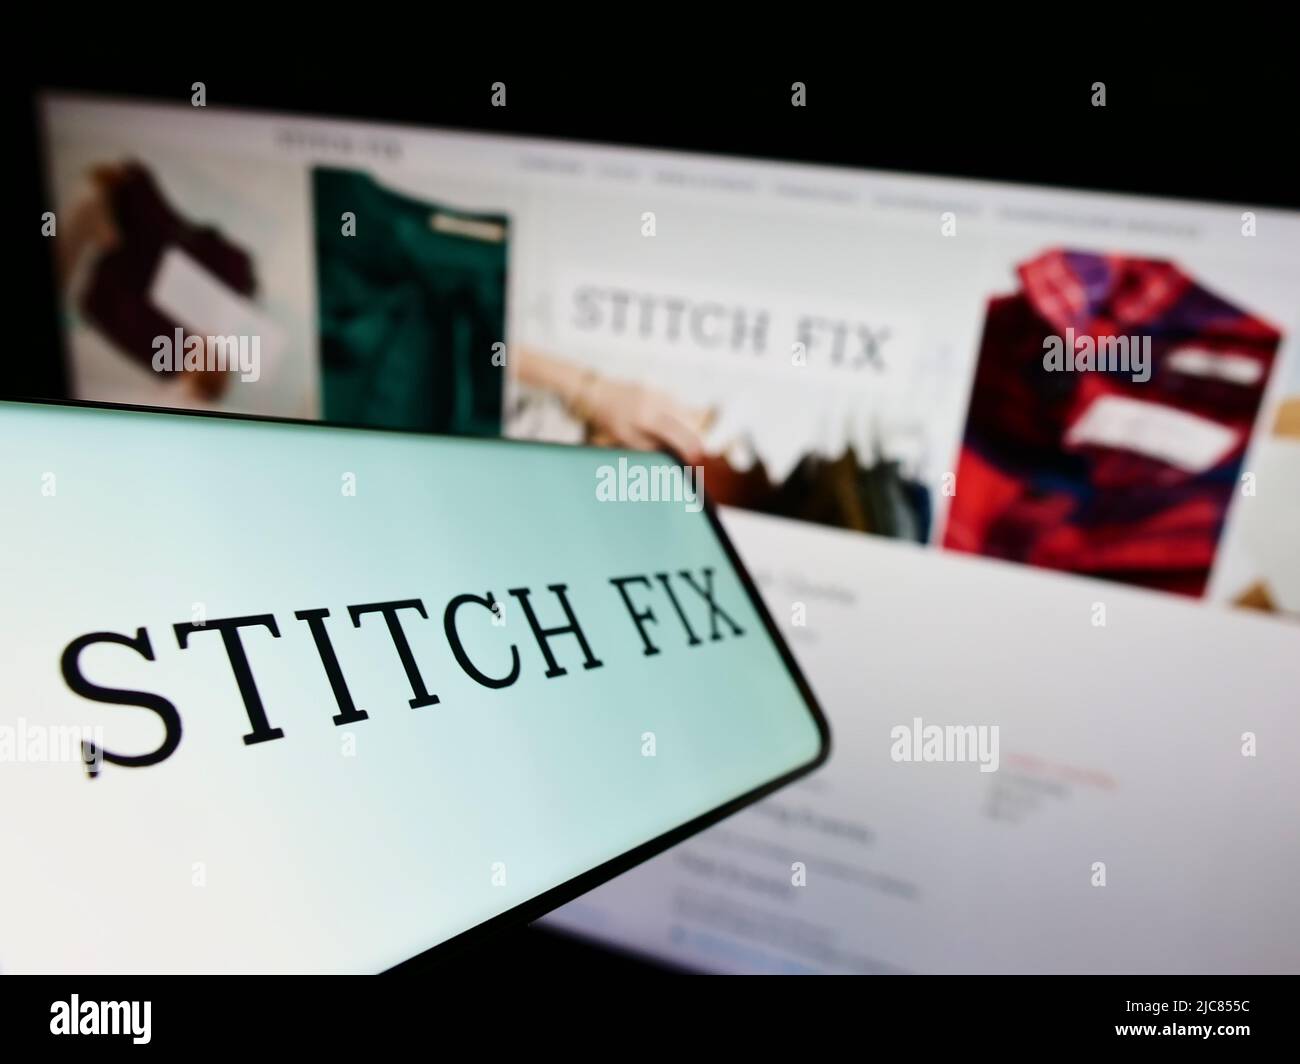 Smartphone with logo of American styling company Stitch Fix Inc. on screen in front of business website. Focus on center-left of phone display. Stock Photo